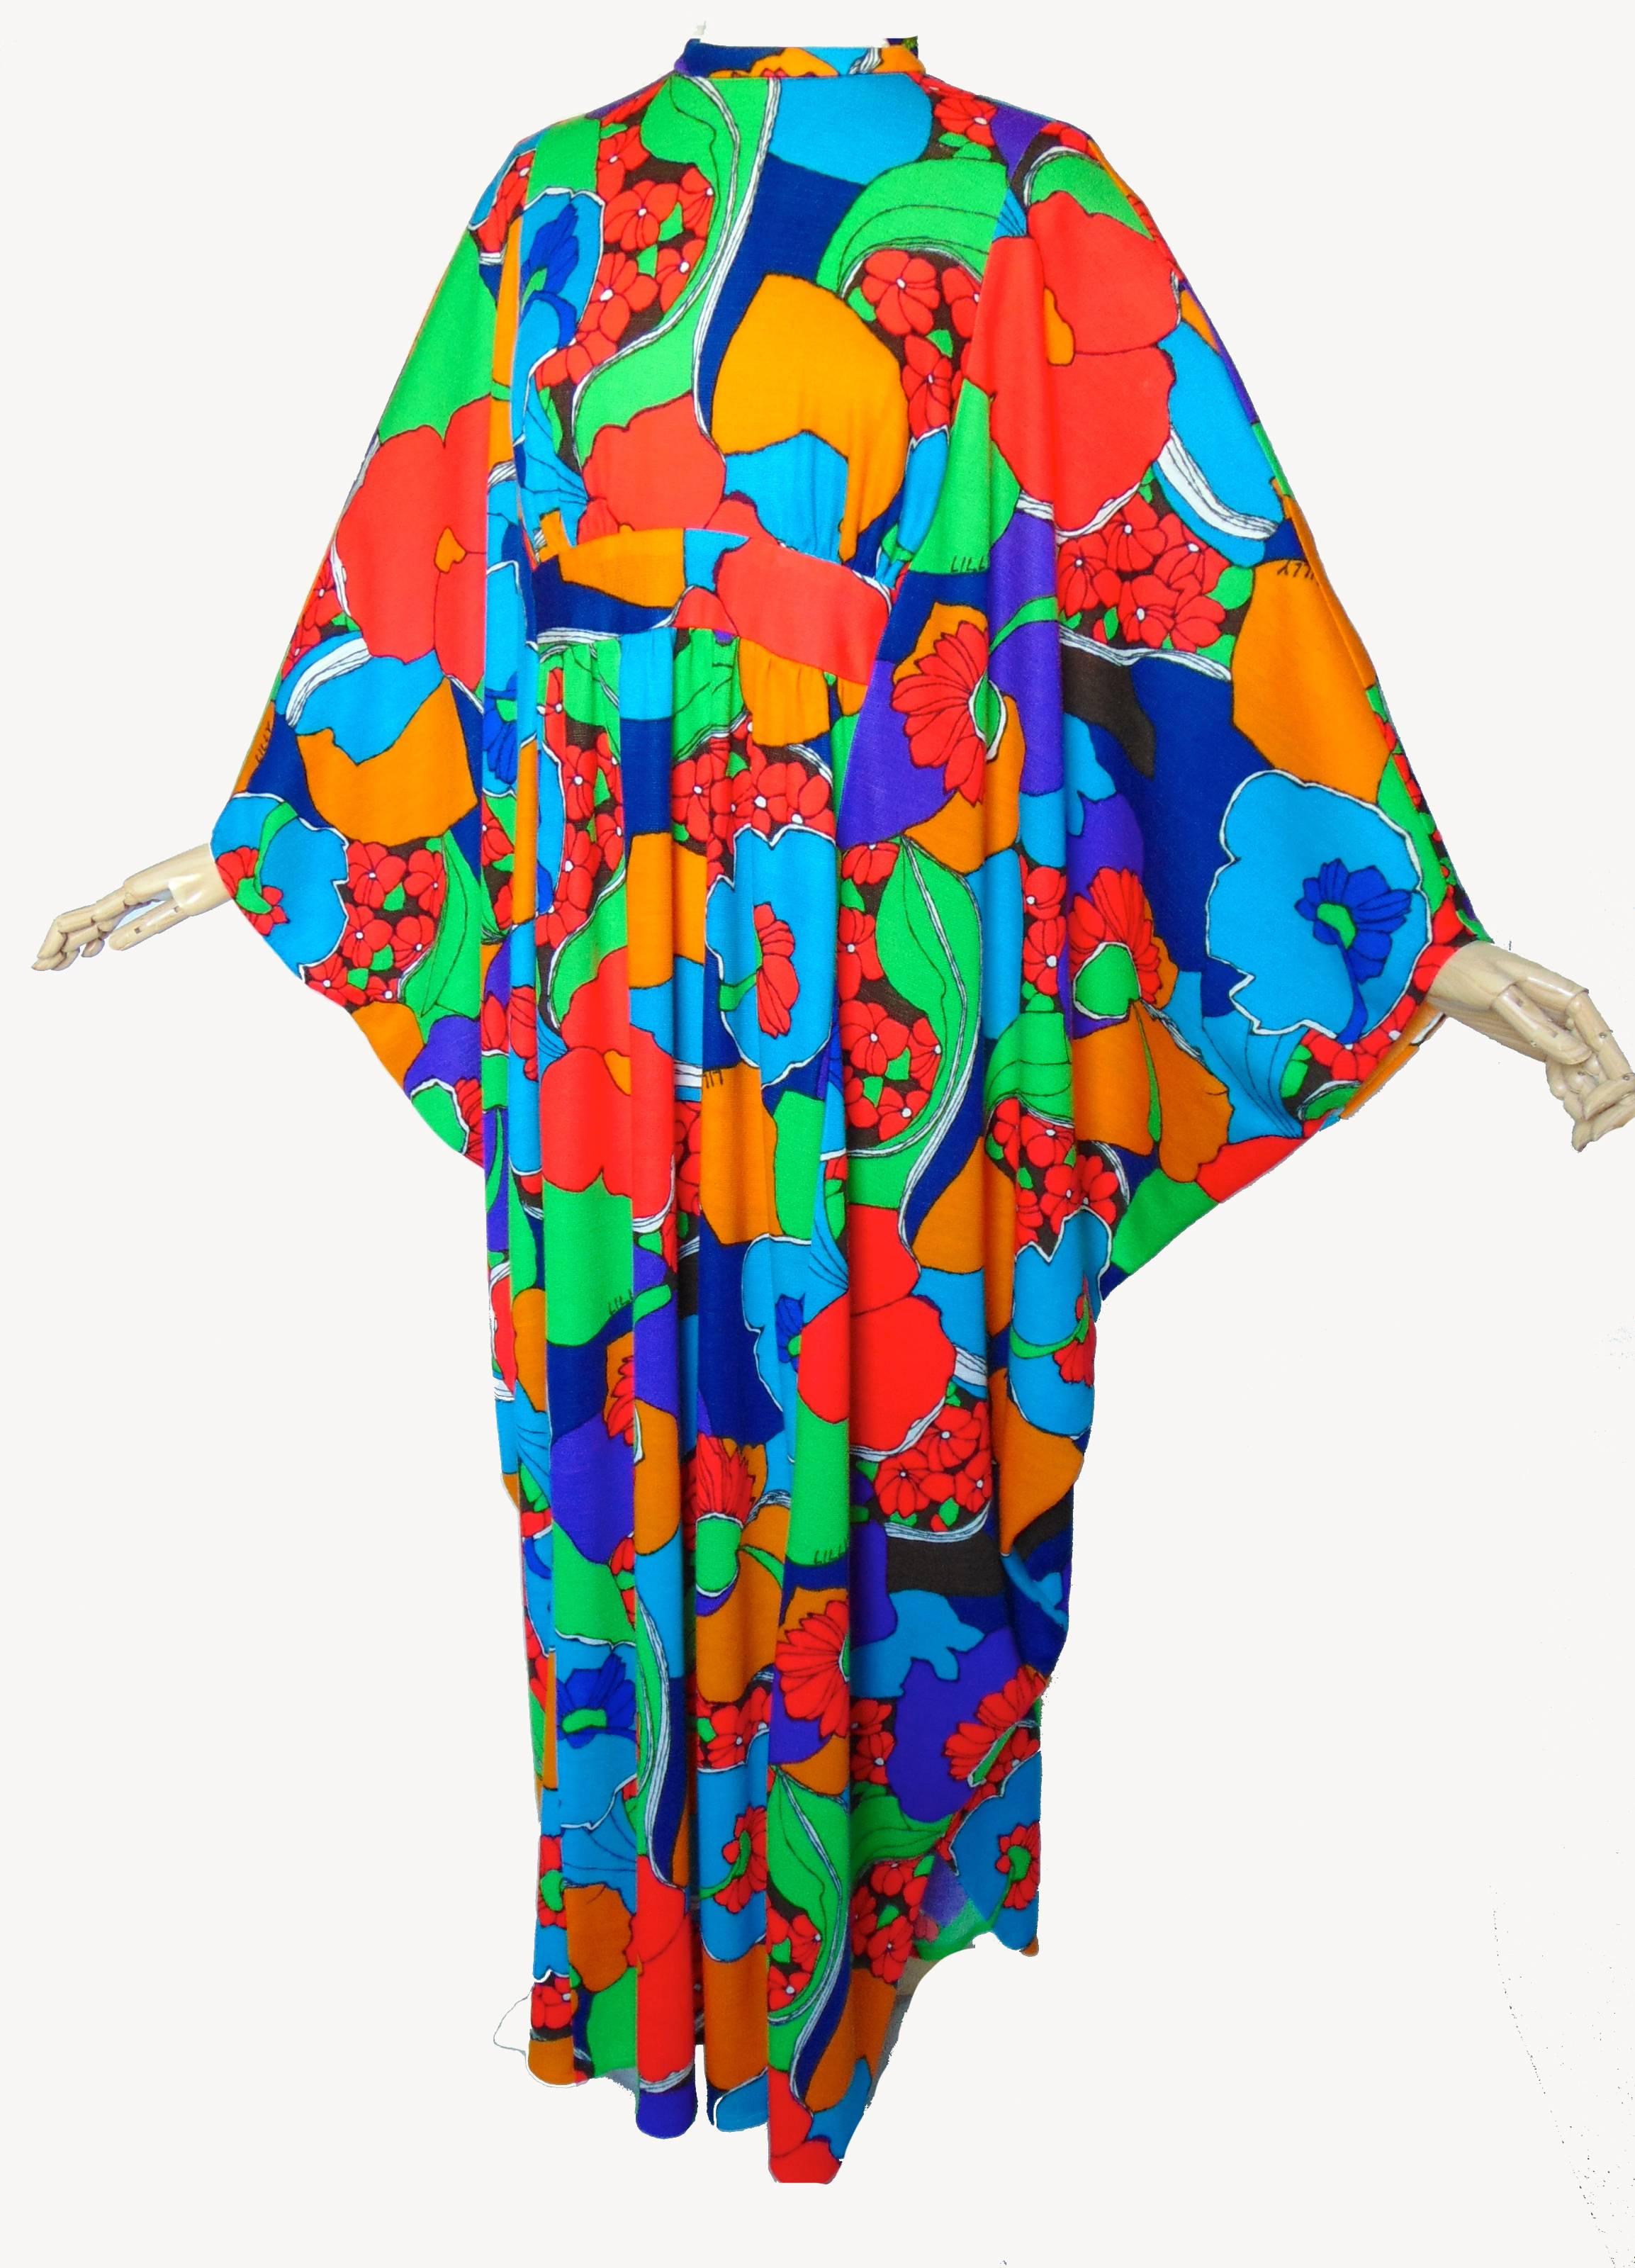 This fabulous Kaftan or Caftan dress was made by Lilly Pulitzer in the early 1970s.  Made from polyester, the fabric features swirling graphic florals in shades of red, orange, aqua, blue, purple, green and white as well as the 